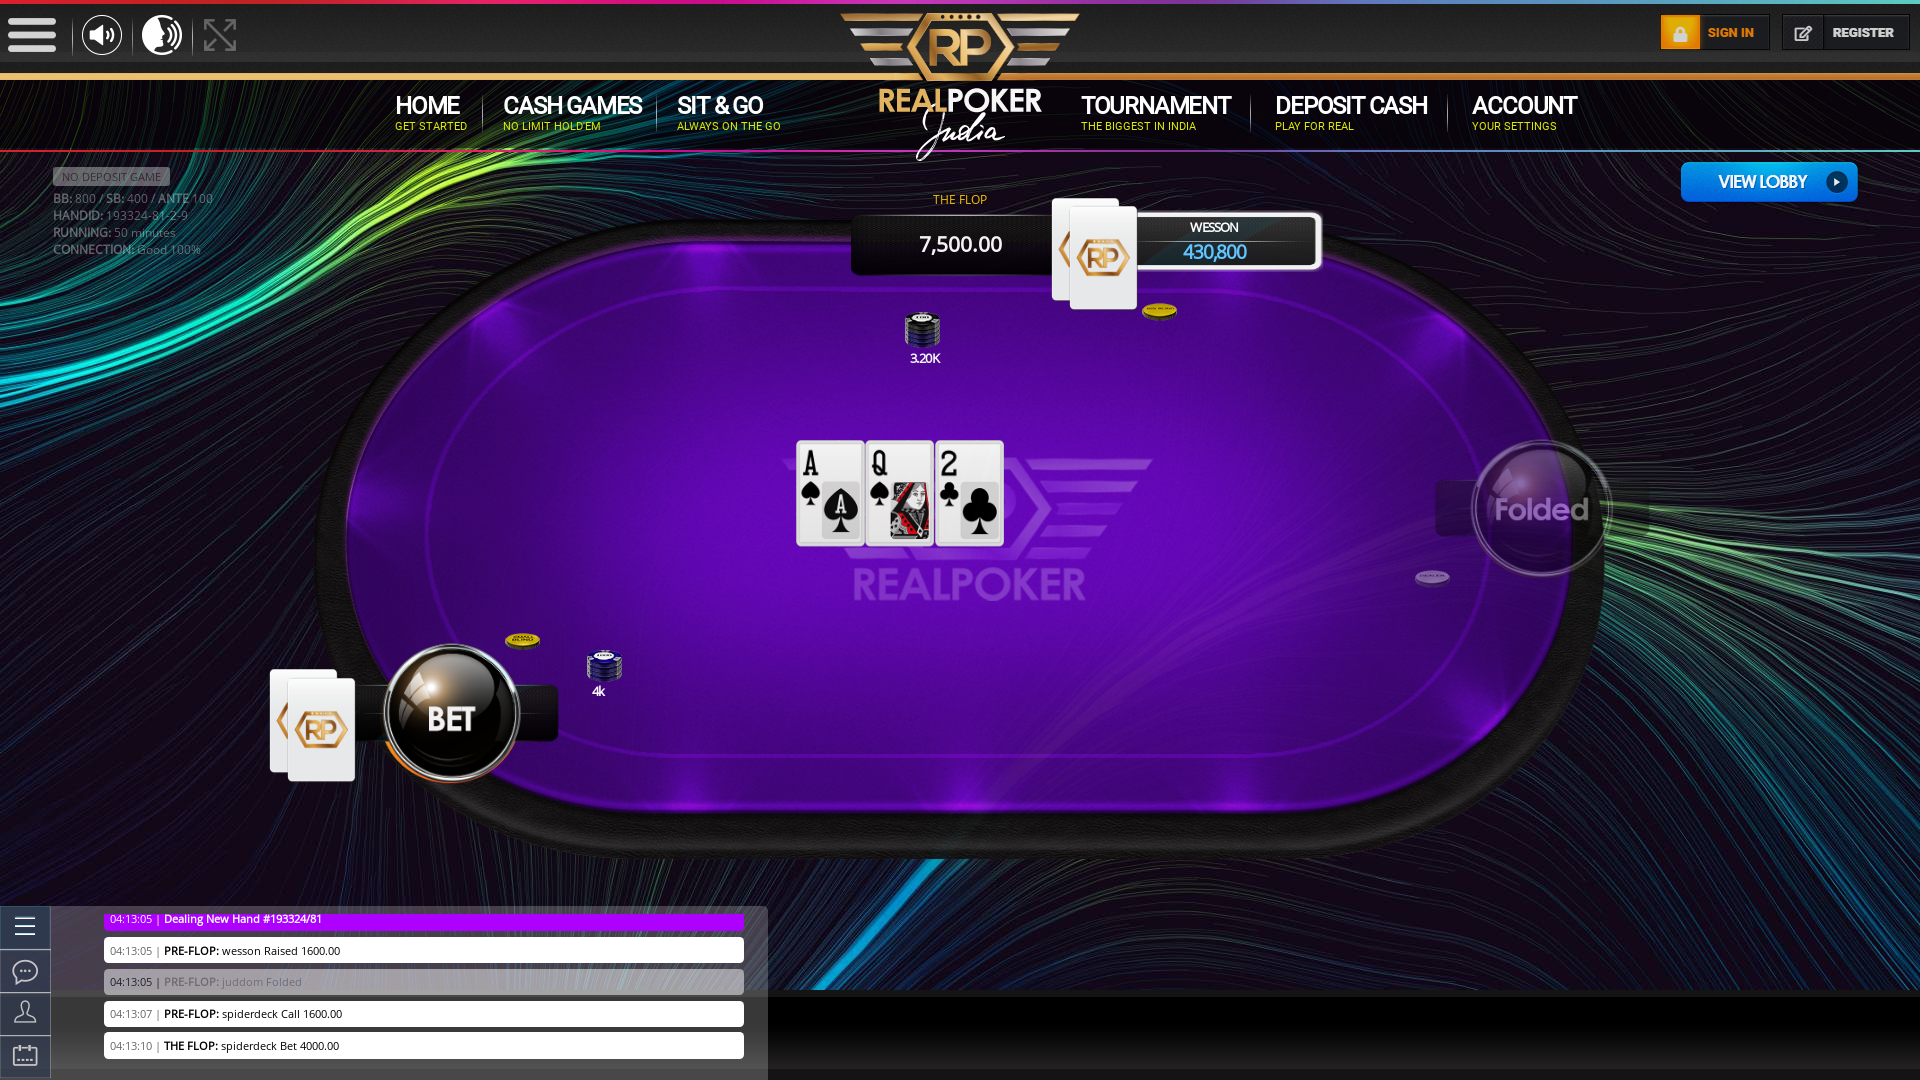 Indian poker on a 10 player table in the 49th minute